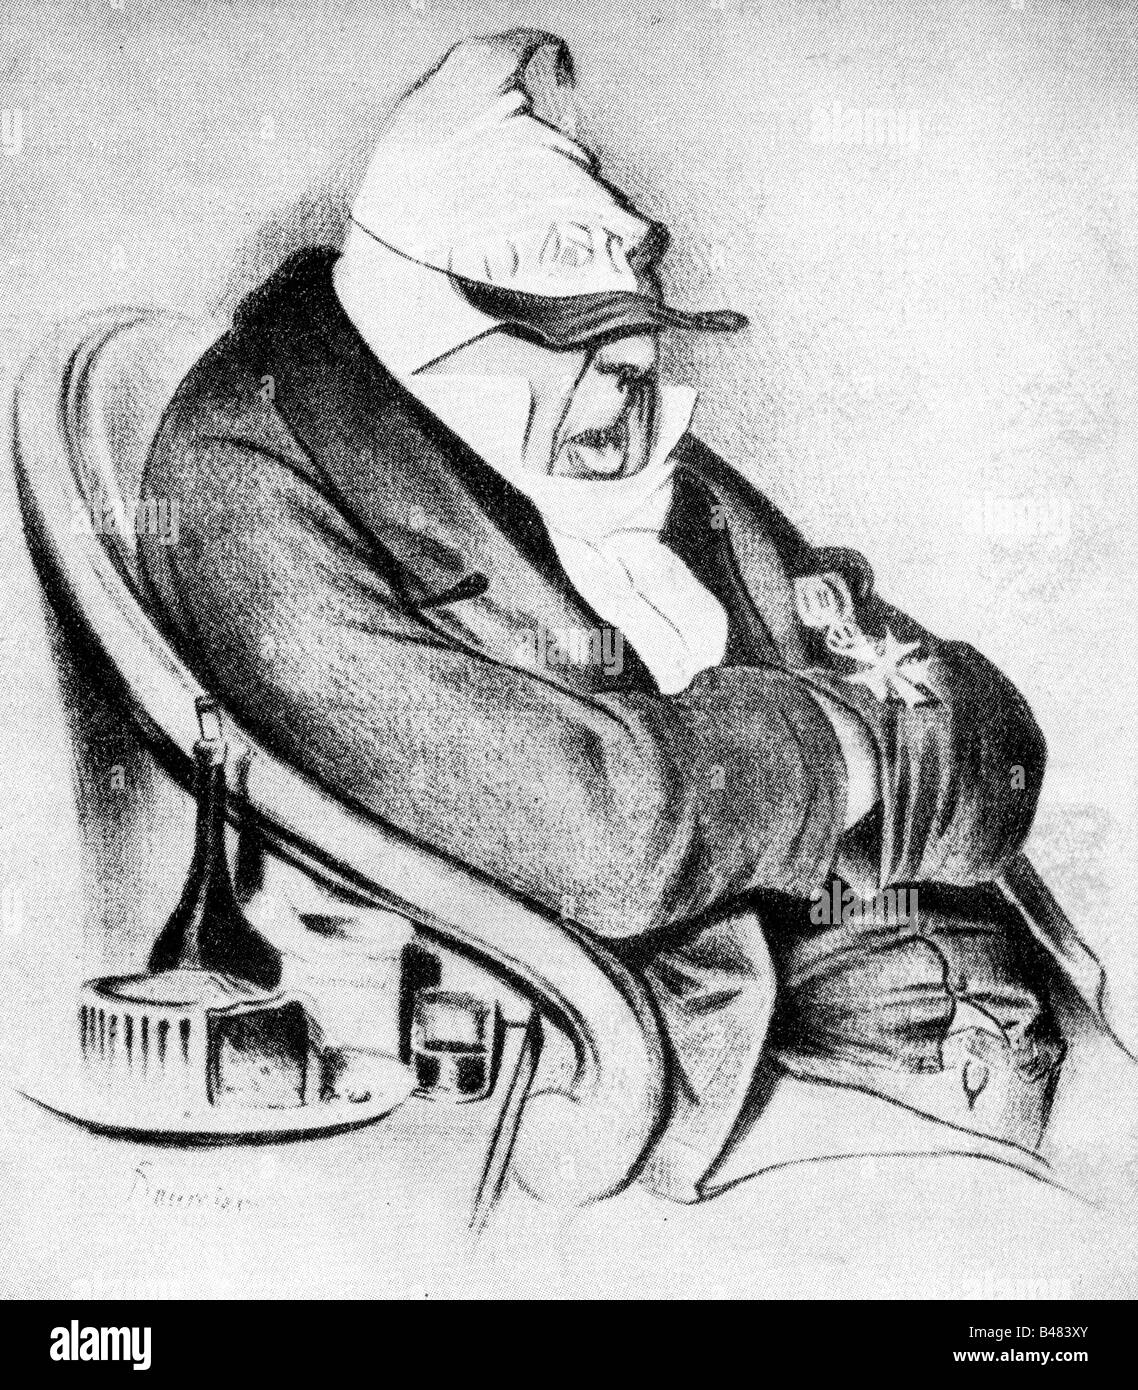 Daumier, Honore, 26.2.1808 - 10.2.1879, French painter, caricaturist, works, caricature, personification of reactionary press, 19th century, fine arts, politics, France, sleeping, night cap, , Stock Photo